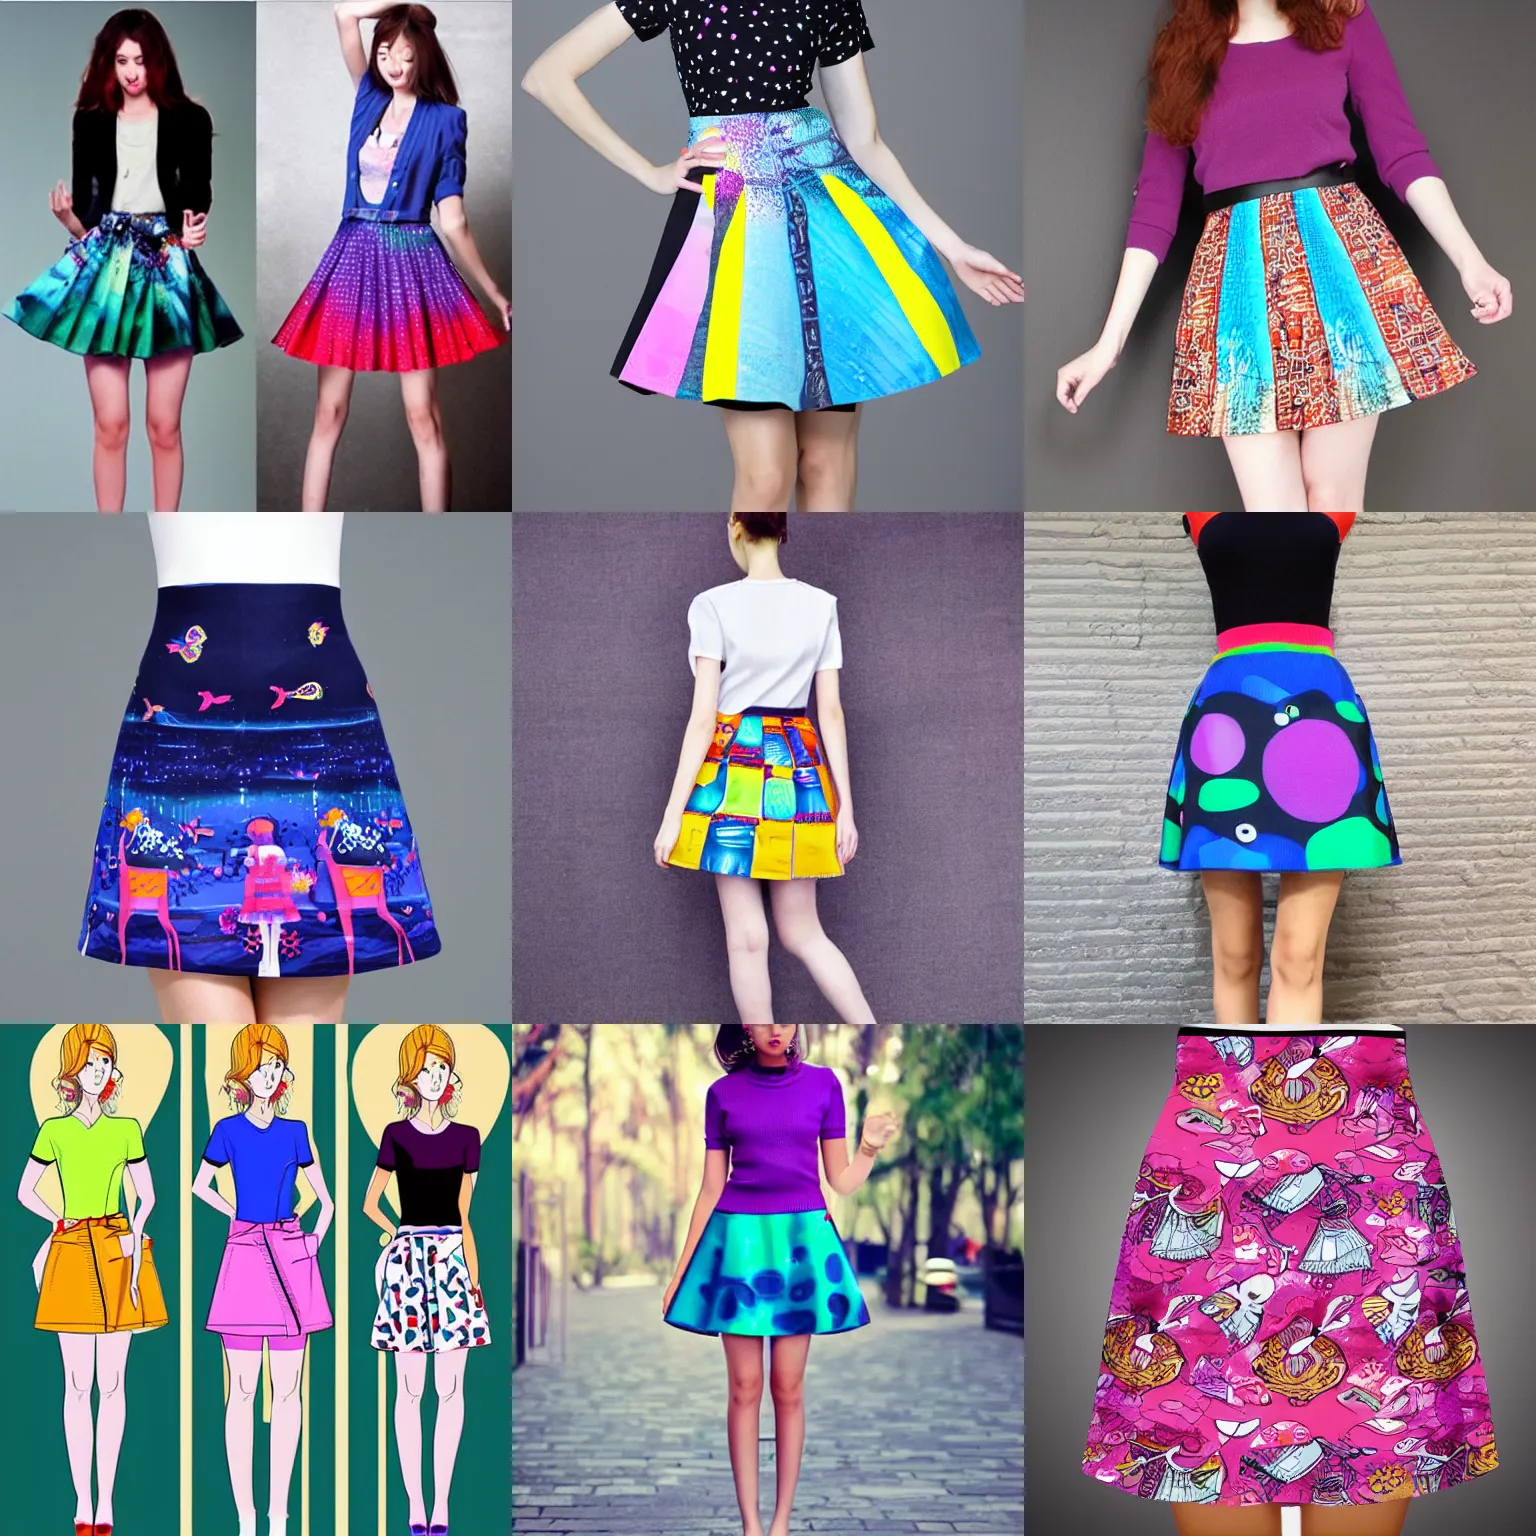 Prompt: clothing design, short skirt, have a sense of design, animation, colorful in colour